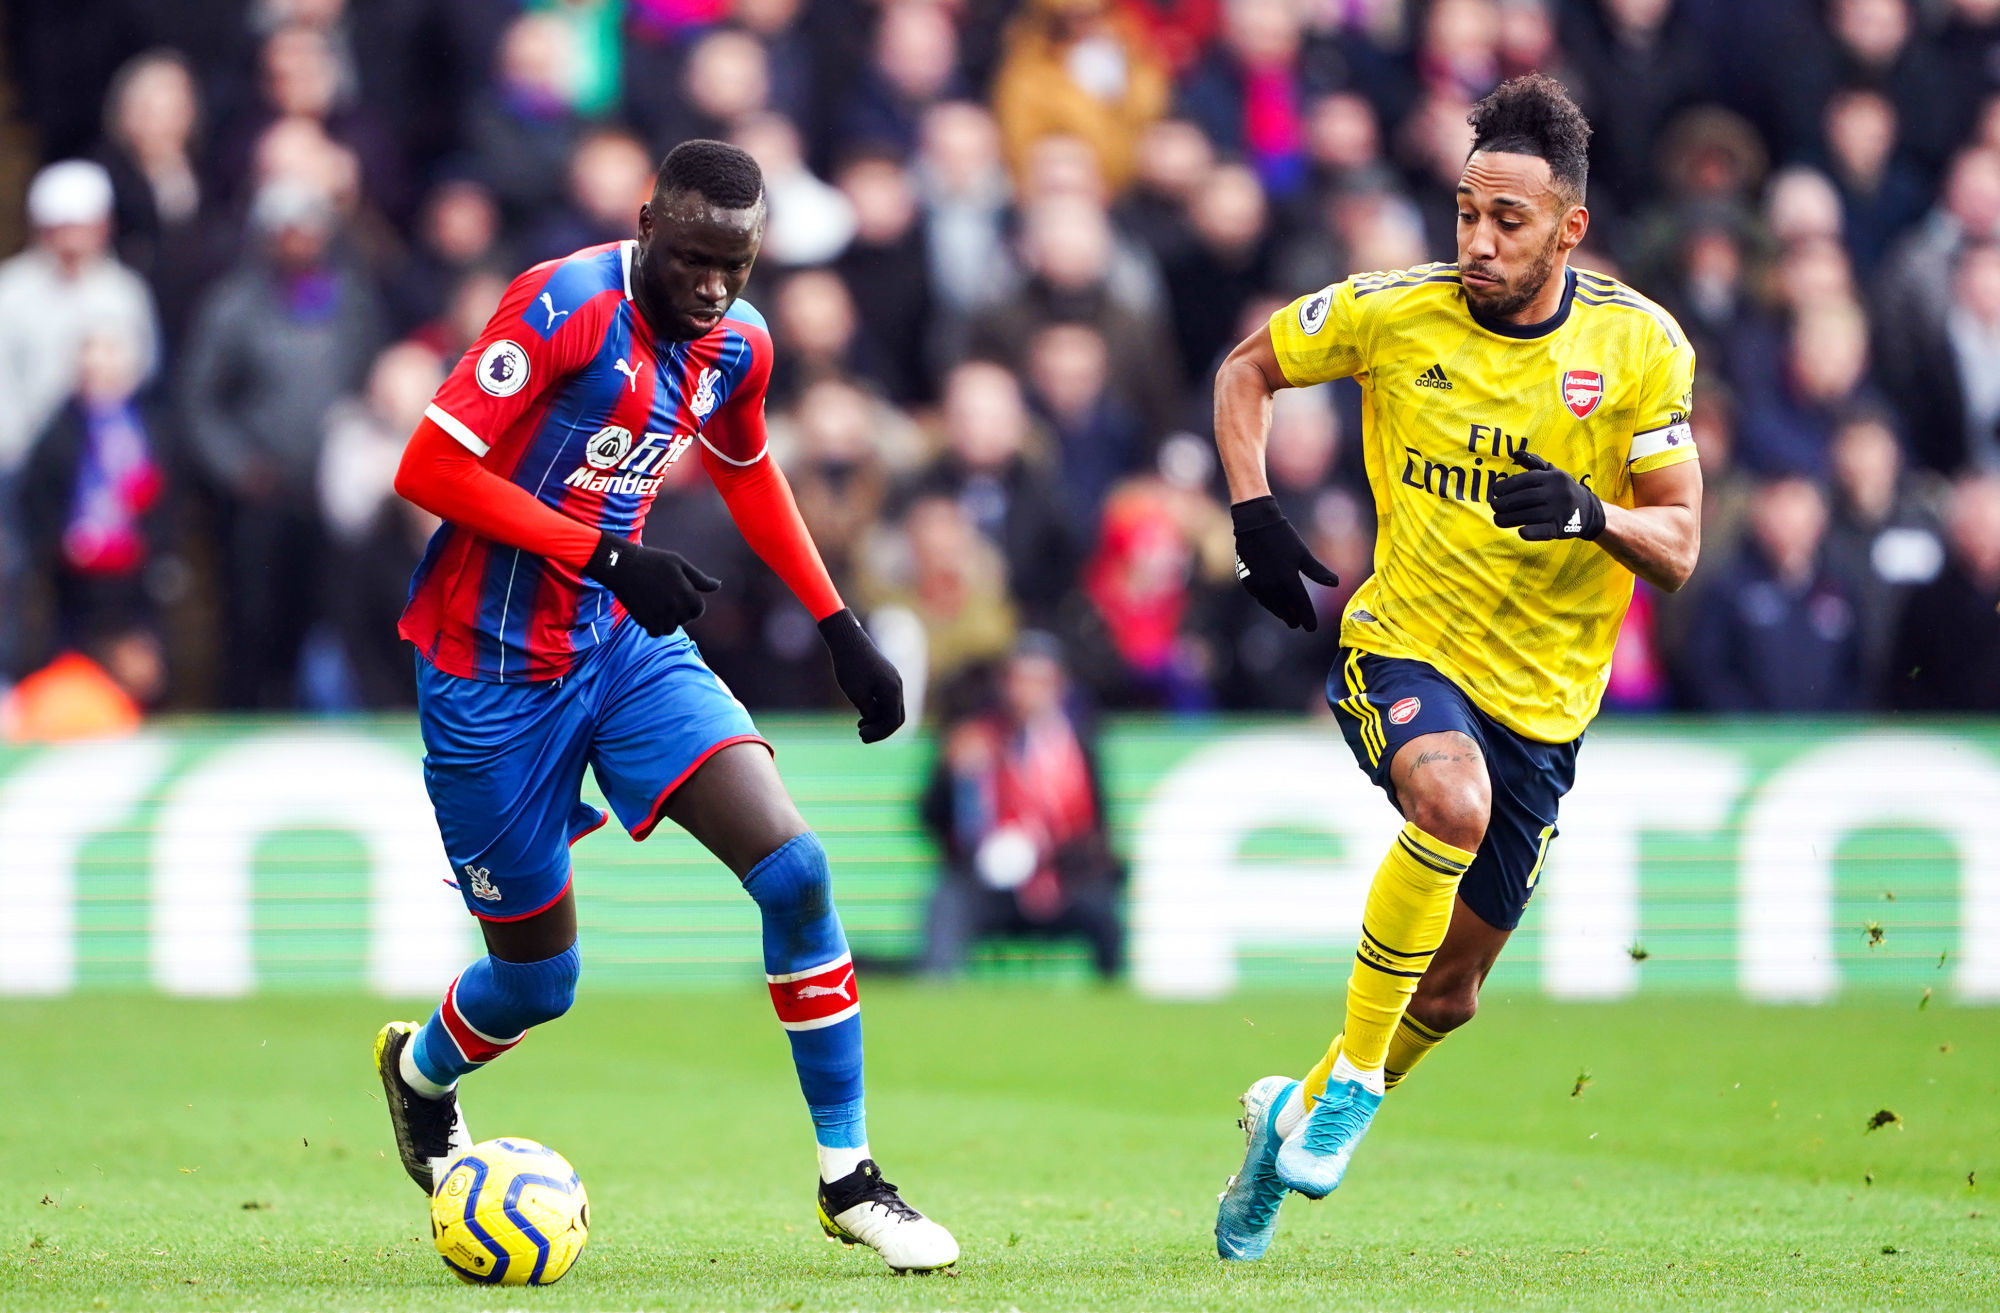 Crystal Palace's Cheikhou Kouyate (left) and Arsenal's Pierre-Emerick Aubameyang battle for the ball during the Premier League match at Selhurst Park, London. 

Photo by Icon Sport - Selhurst Park - Londres (Angleterre)